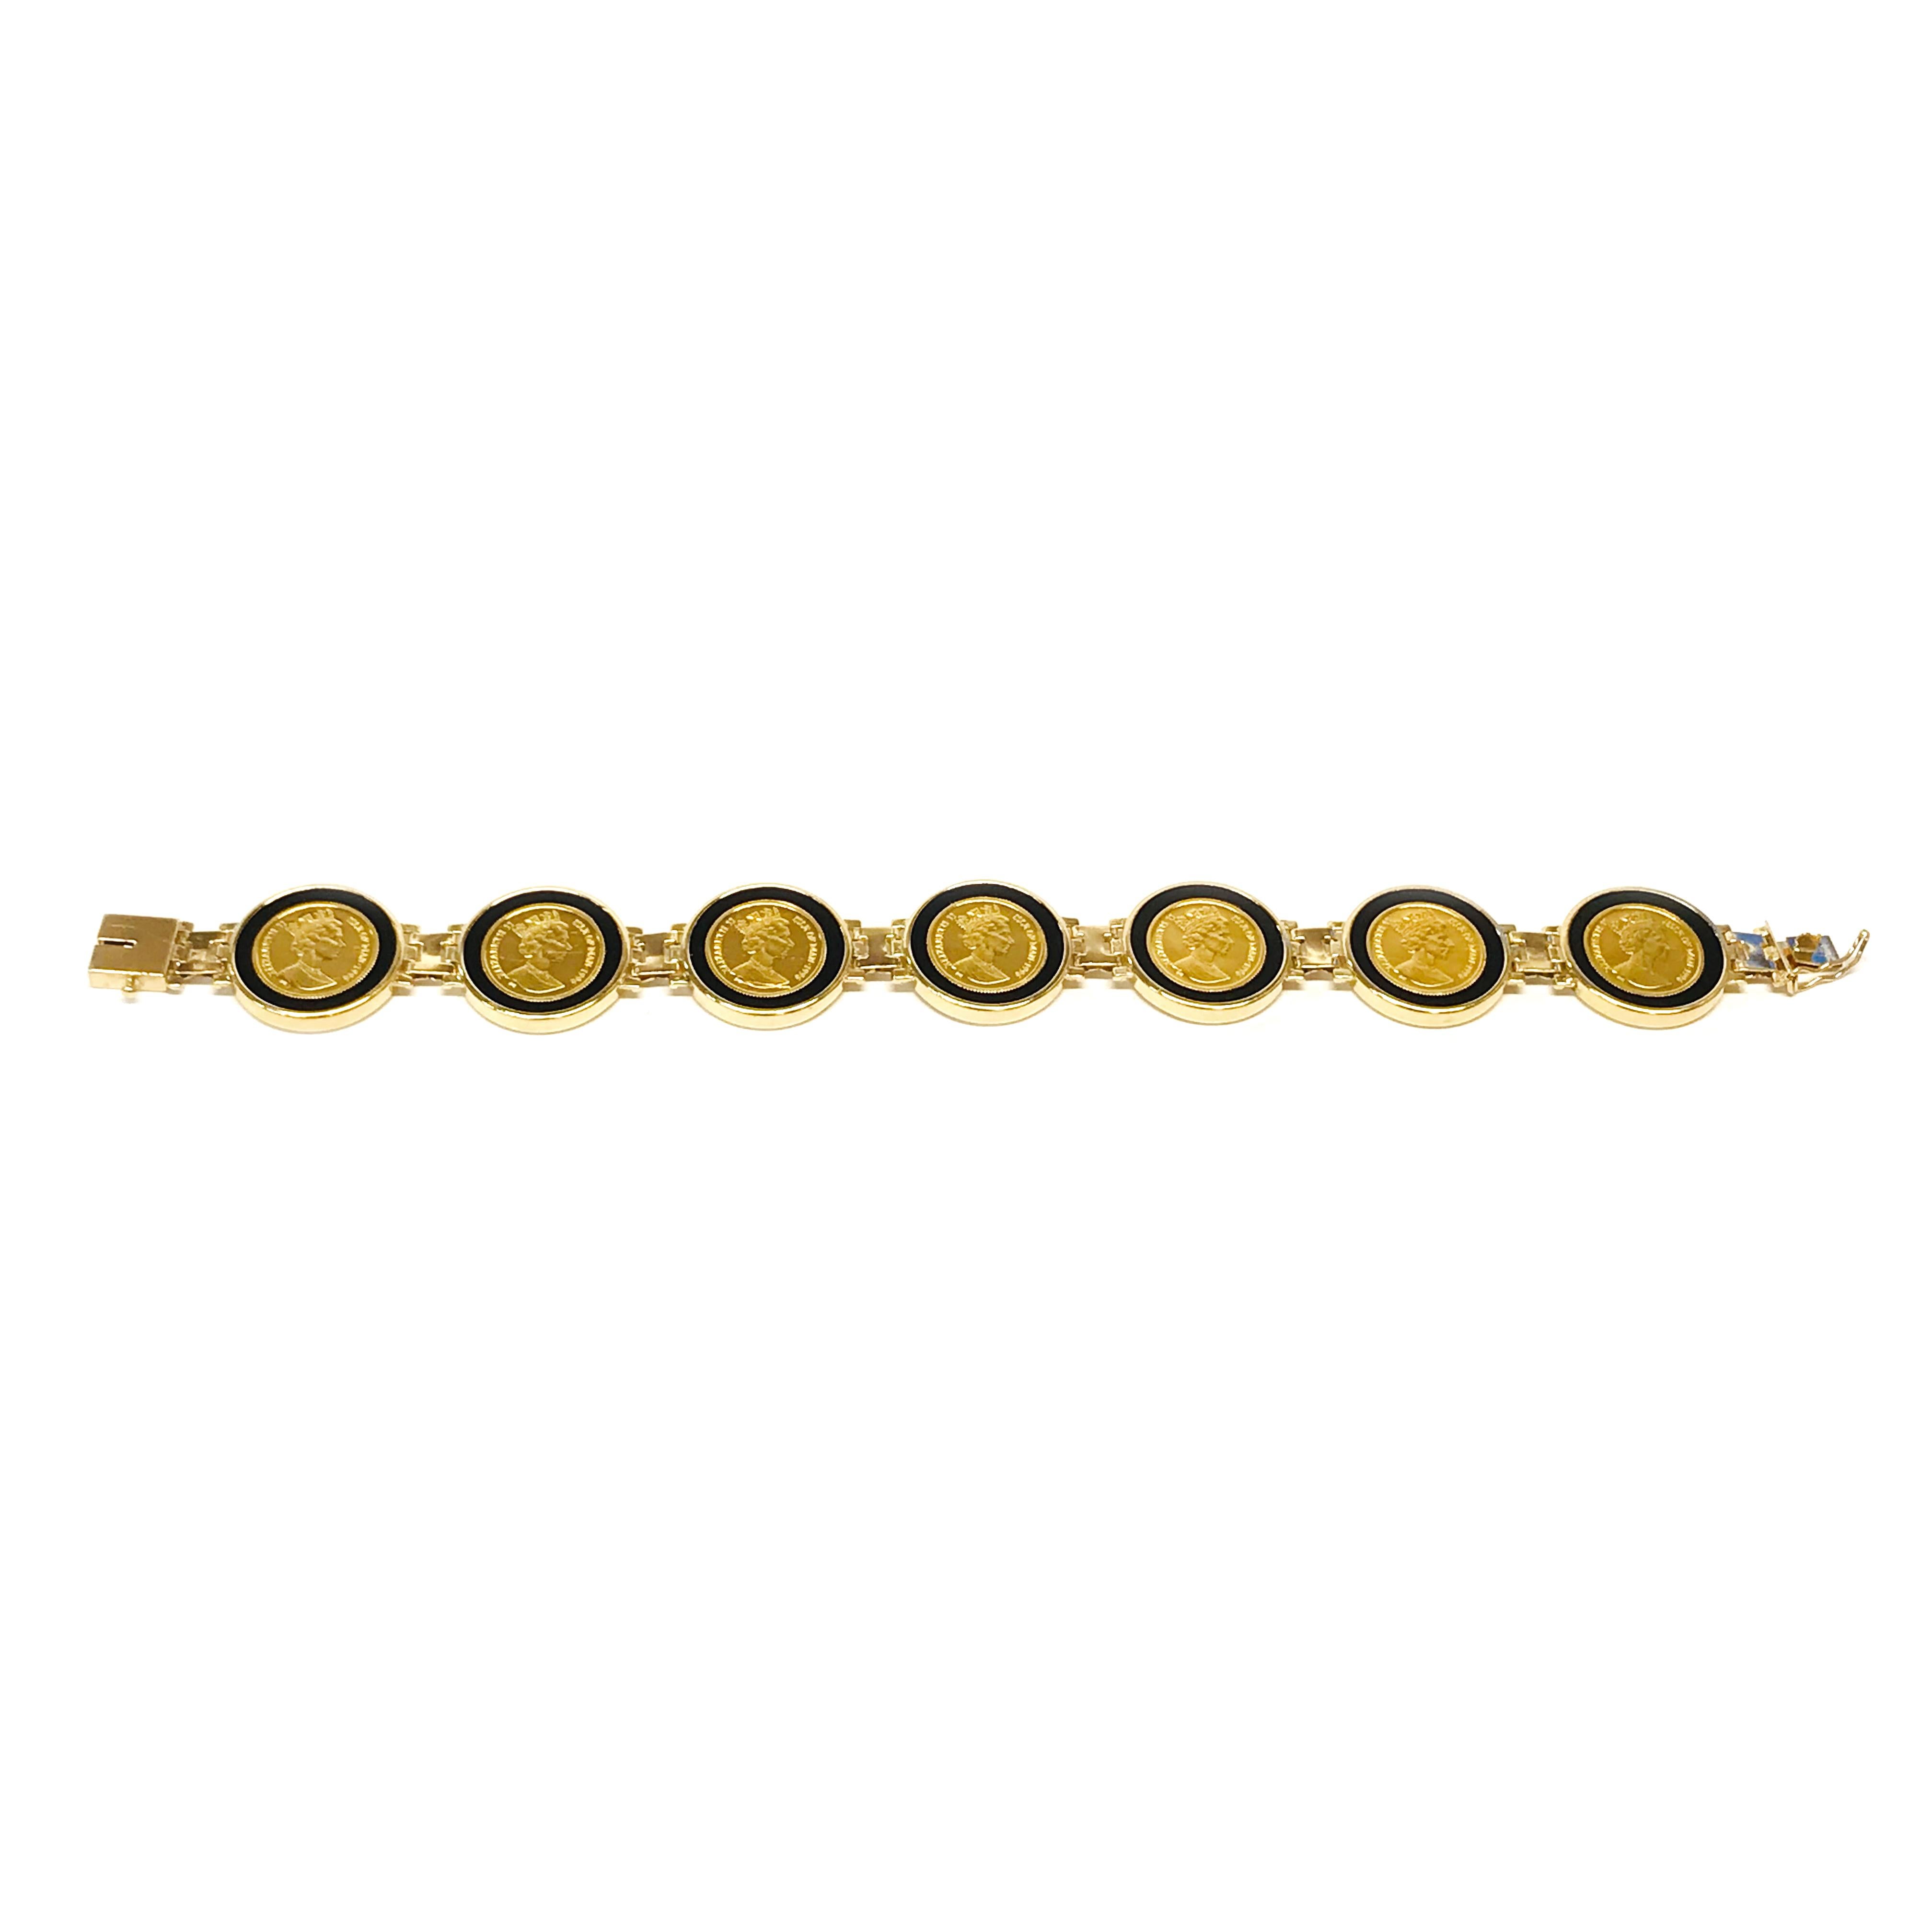 14 Karat Queen Elizabeth II Coin Bracelet. This lovely bracelet features seven 1996 Isle of Man coins flush-set in round onyx. The coin depicts the likeness of Her Majesty Queen Elizabeth II. The bracelet is 7.5